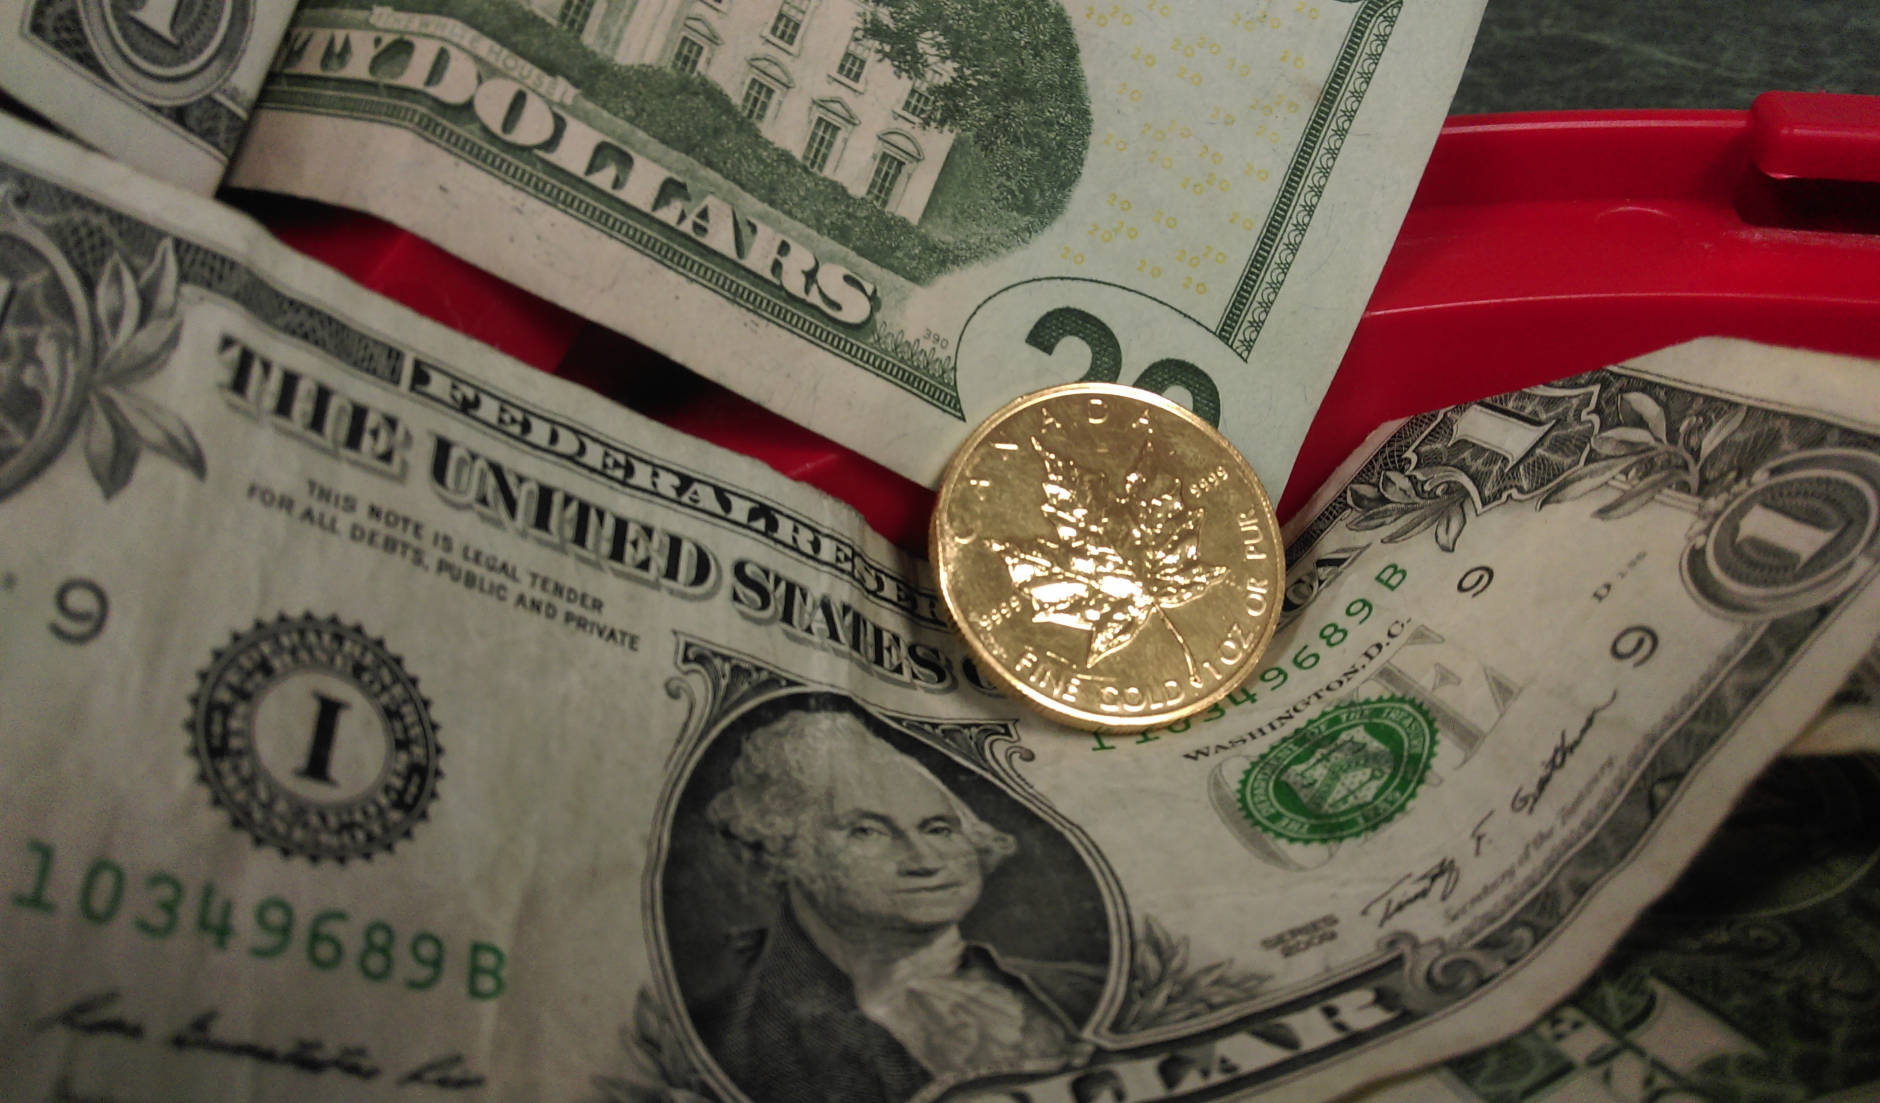 A gold coin was given to the Salvation Army in a kettle in Cabin John, Maryland. (Courtesy Salvation Army)